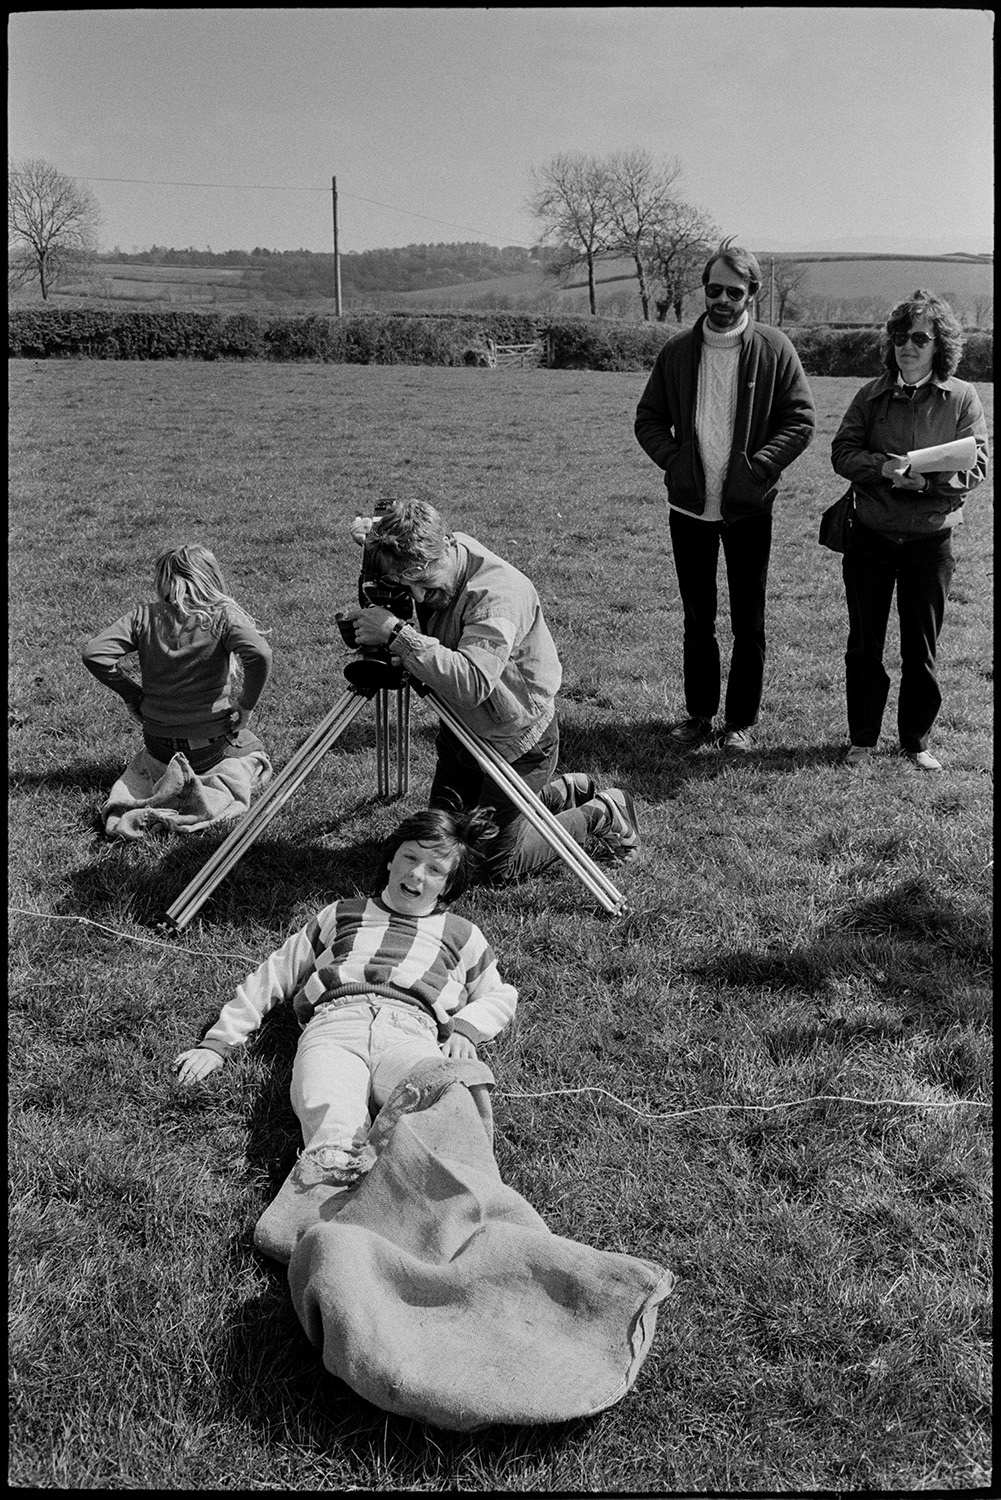 Club Day, sports, sack race, wellie throwing, man filming.
[Children being filmed by Malcolm Baldwin, using on a tripod, in a sack race in a field at Iddesleigh Club Day. Two people are watching in the background.]